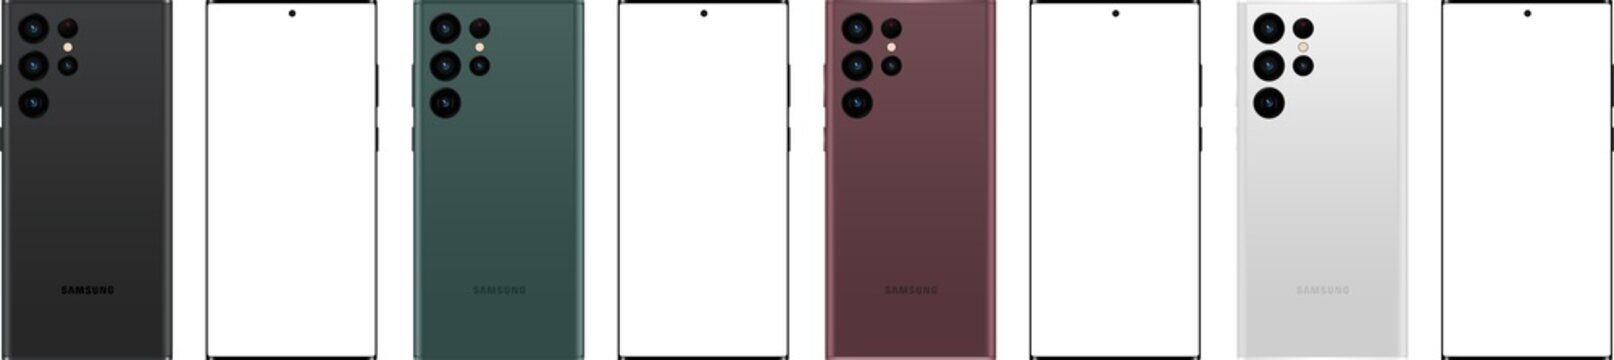 New Samsung - Galaxy S22 - Burgundy / Phantom Black / Green / White color. Smartphone screen mockup front and back view. Phone mockup with transparent screen on transparent background. PNG image